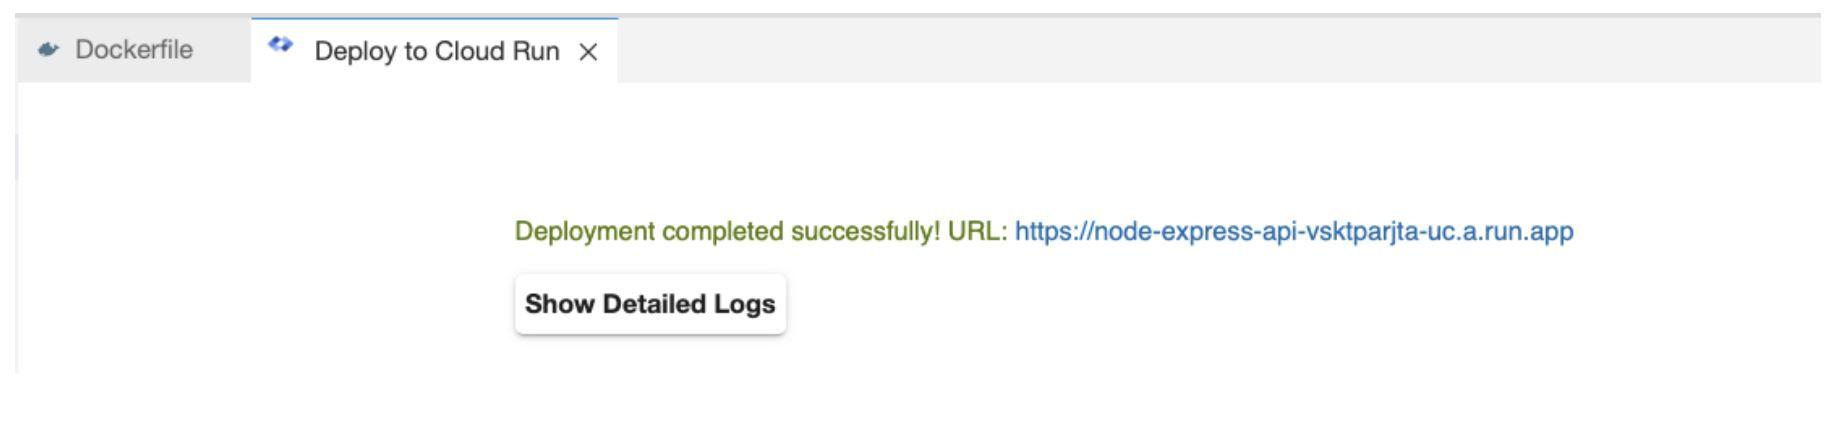 Screenshot displaying the message 'Deployment completed successfully!' and the deployment URL.
